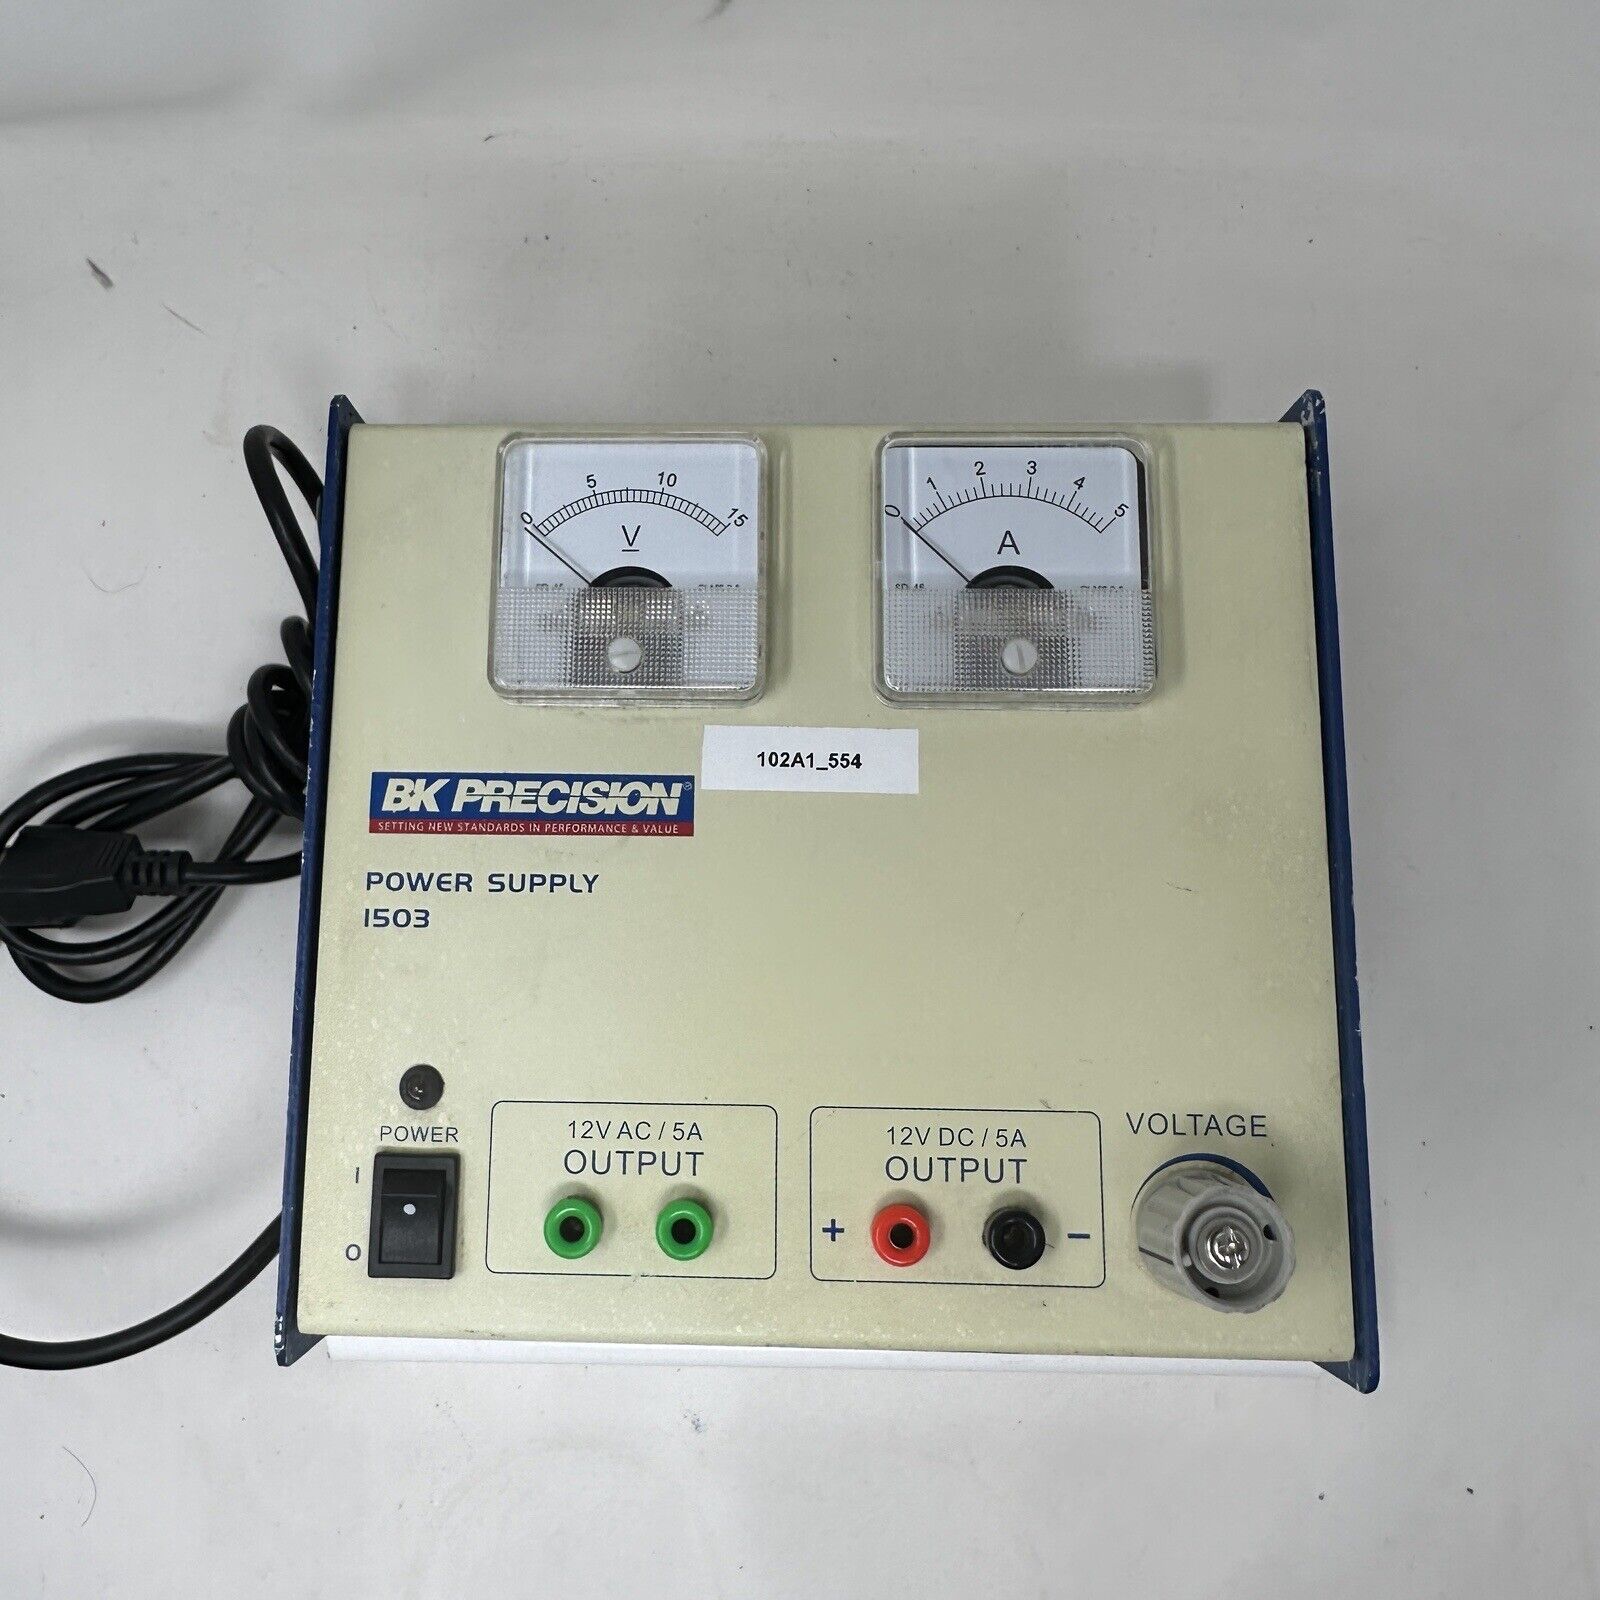 BK Precision Power Supply Model 1503 AC DC Untested Parts Only Not Tested